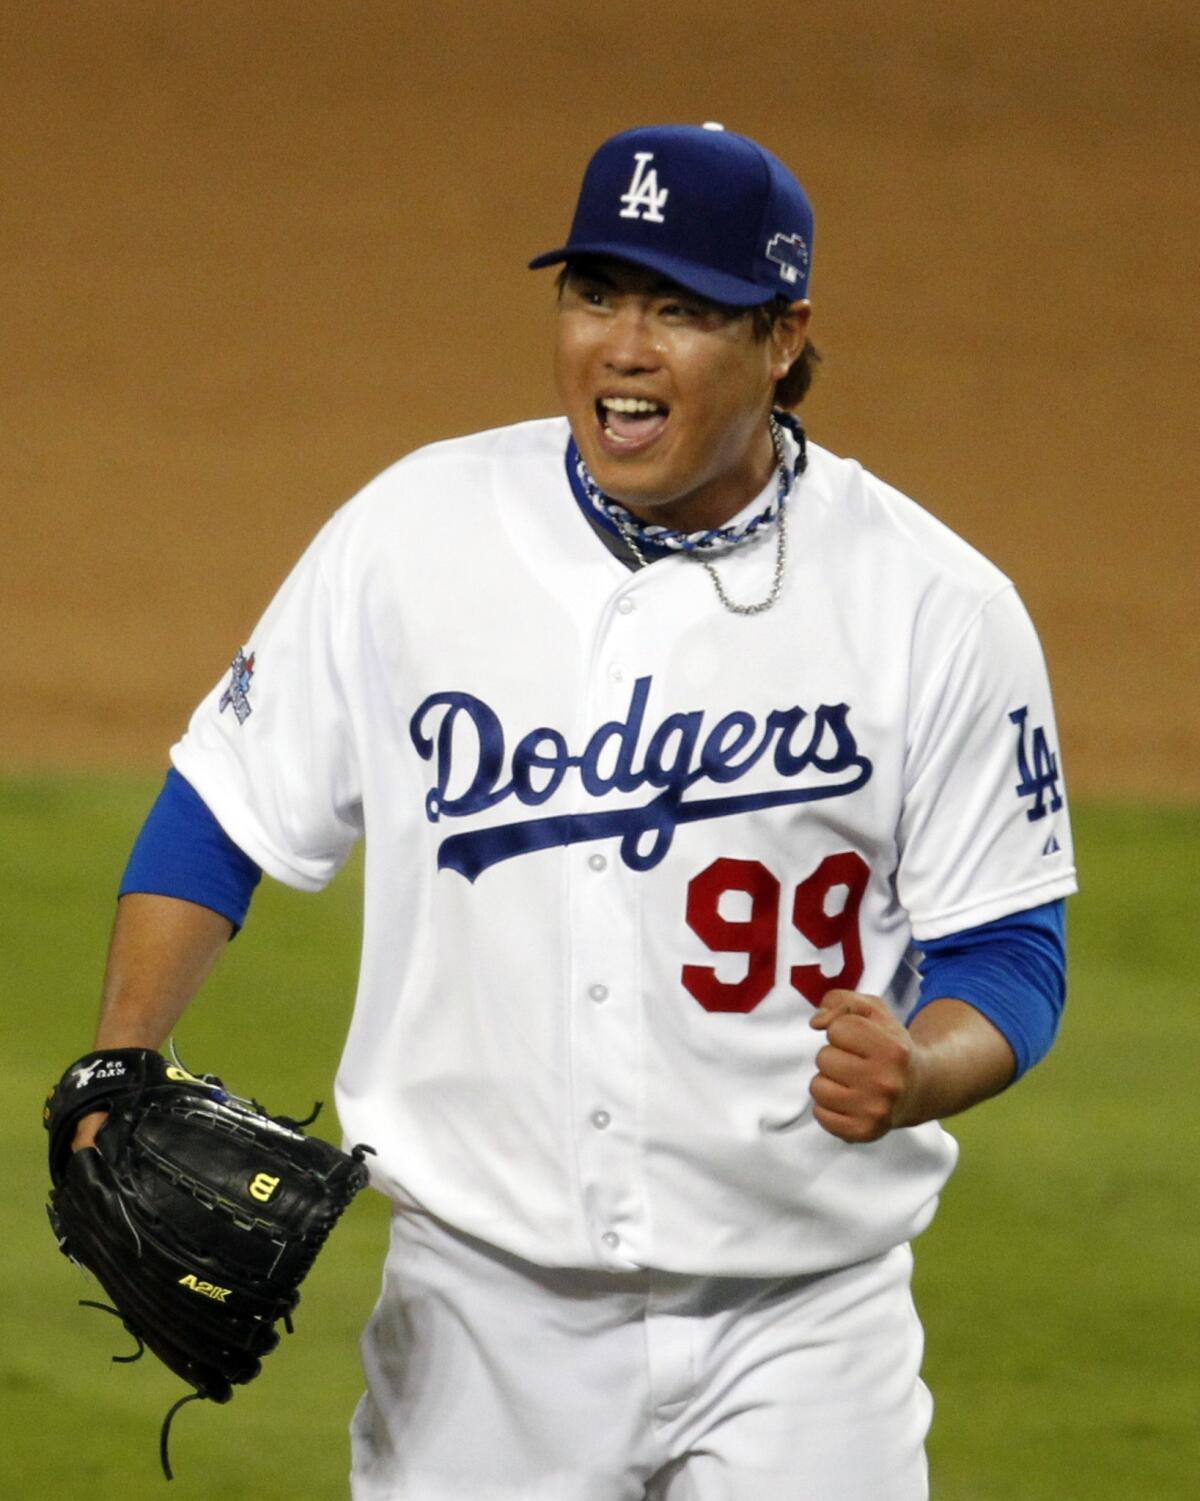 Dodgers starter Hyun-Jin Ryu celebrates his final strikeout during the seventh inning of the Dodgers' 3-0 victory over the St. Louis Cardinals in Game 3 of the National League Championship Series on Monday.